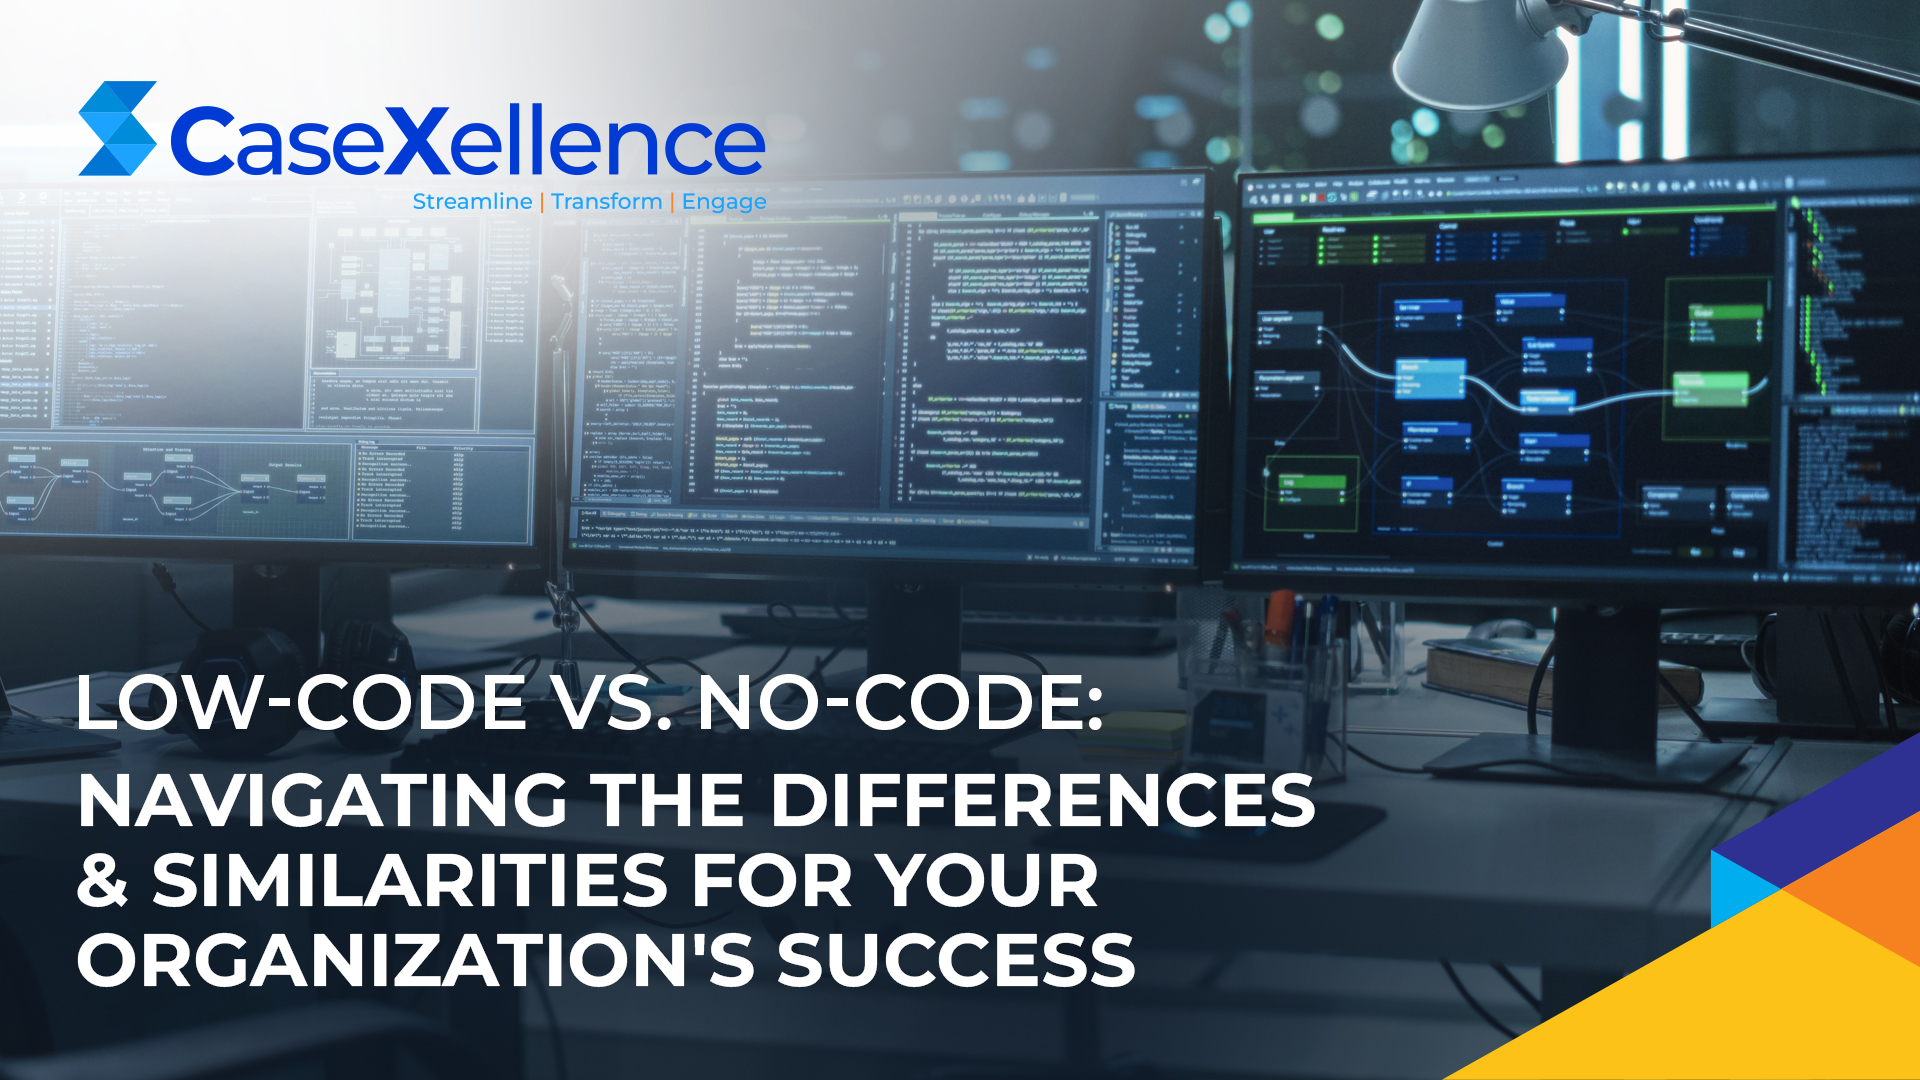 Low-Code vs. No-Code: Navigating the Differences & Similarities for Your Organization’s Success